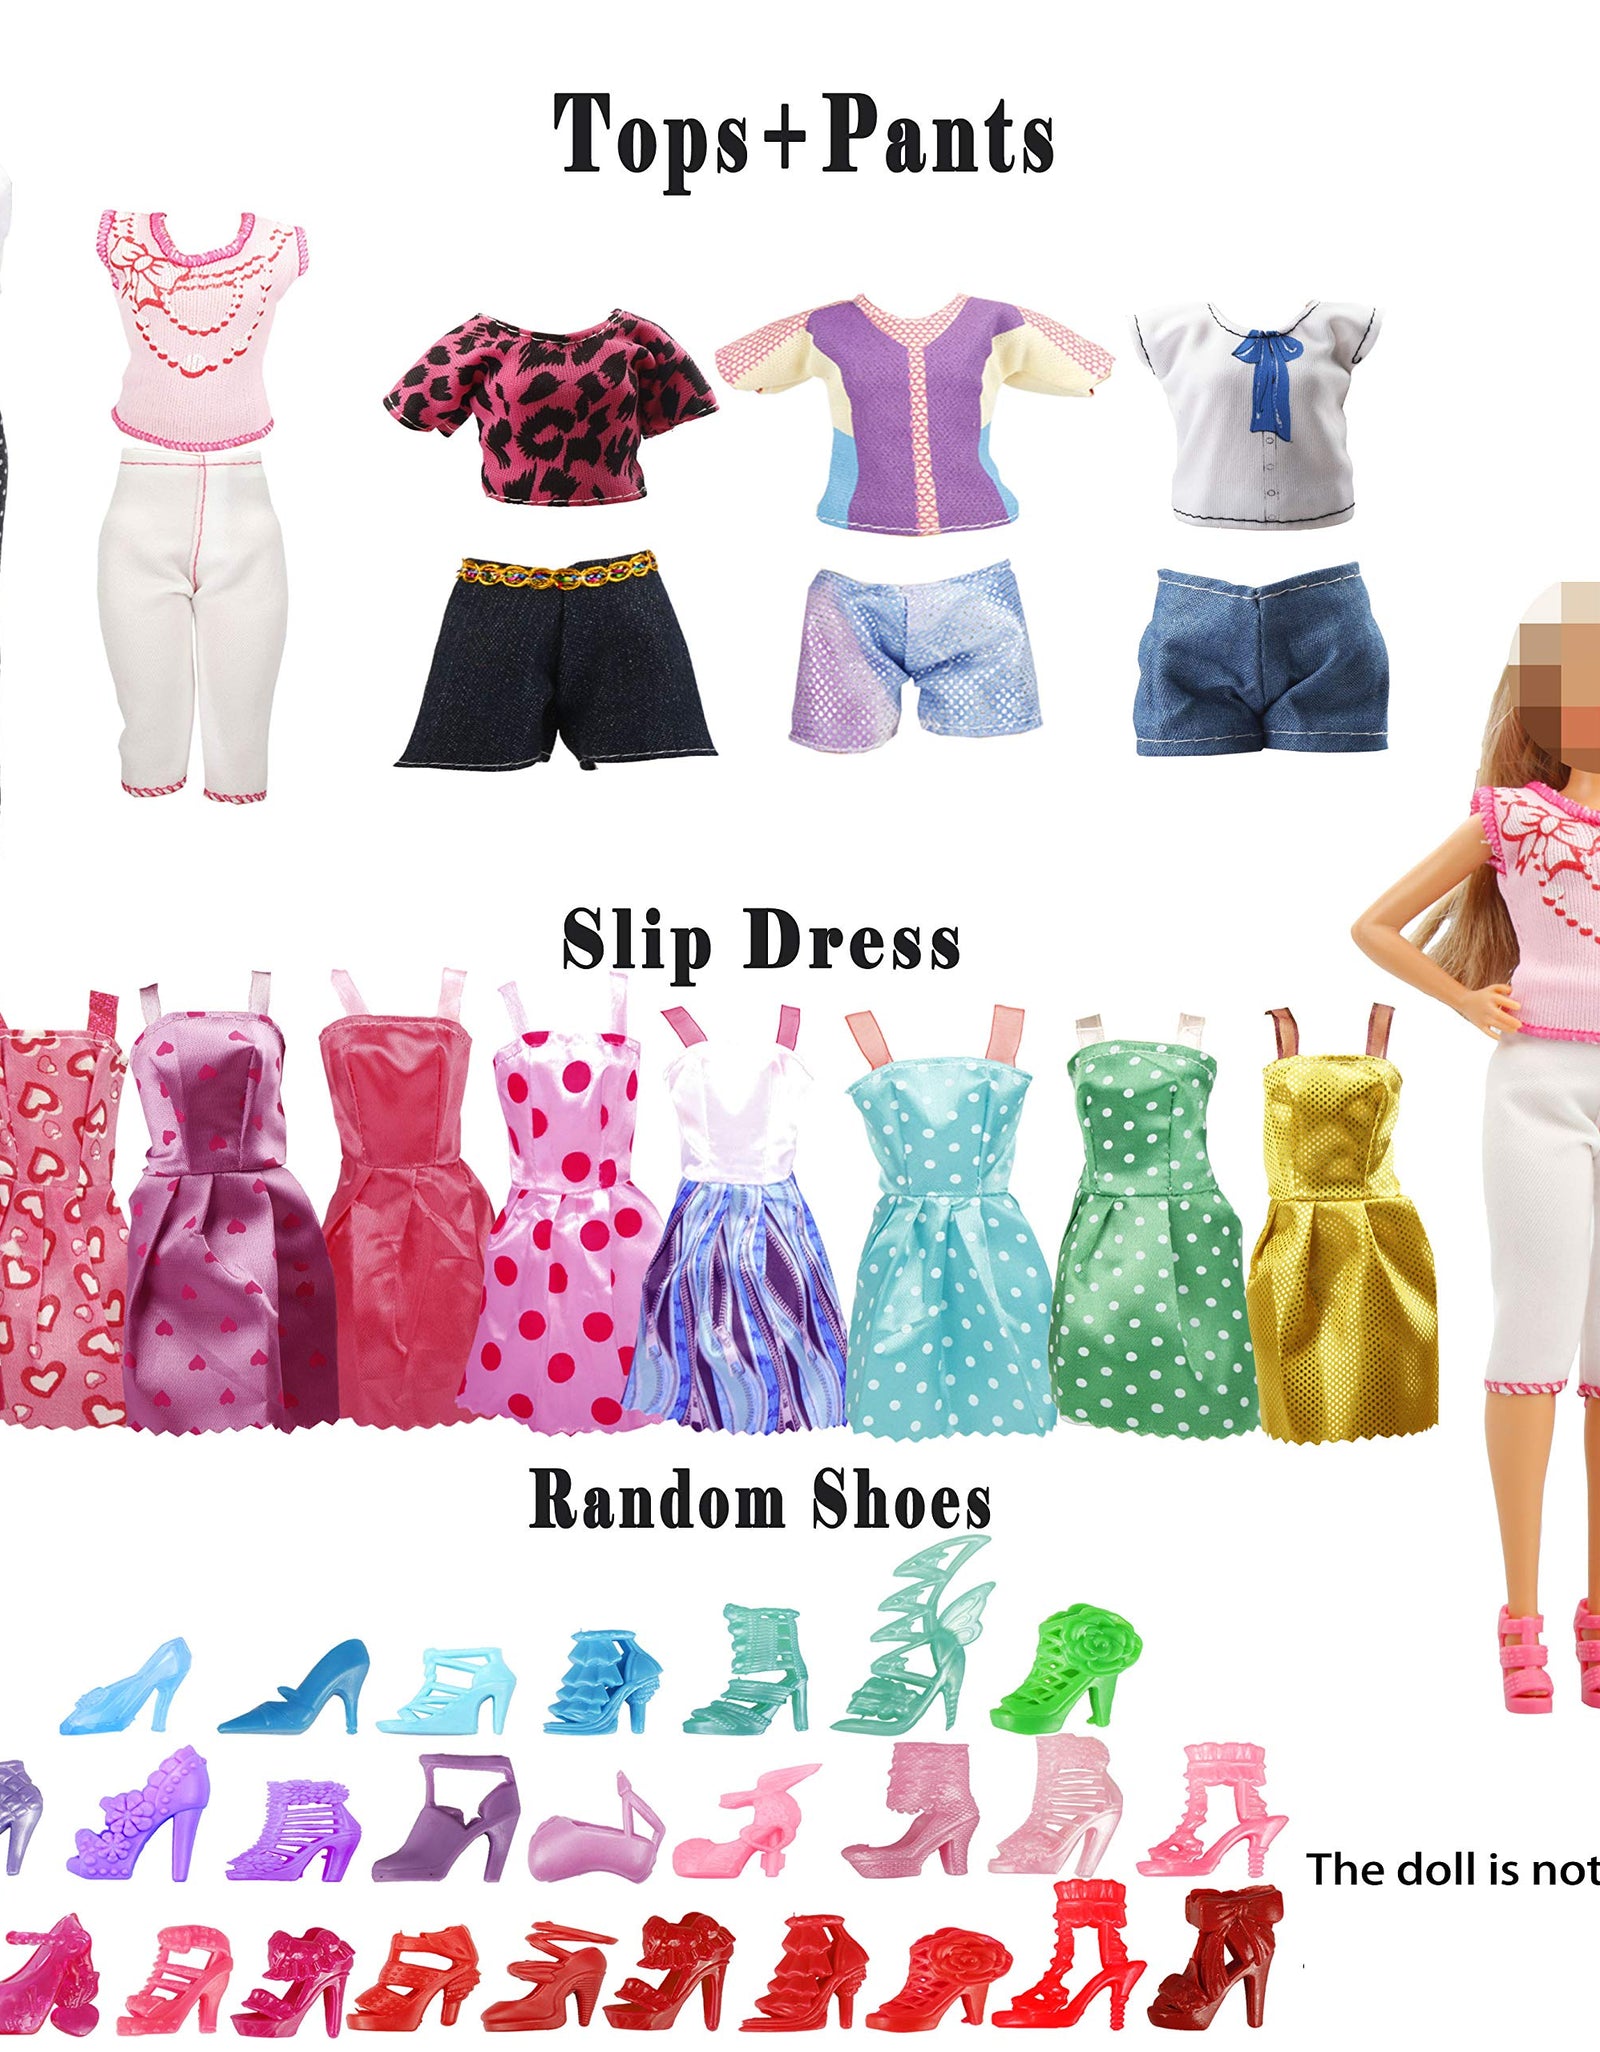 35 Pack Handmade Doll Clothes Including 5 Wedding Gown Dresses 5 Fashion Dresses 4 Braces Skirt 3 Tops and Pants 3 Bikini Swimsuits 15 Shoes and Bonus 10 Hangers for 11.5 Inch Dolls